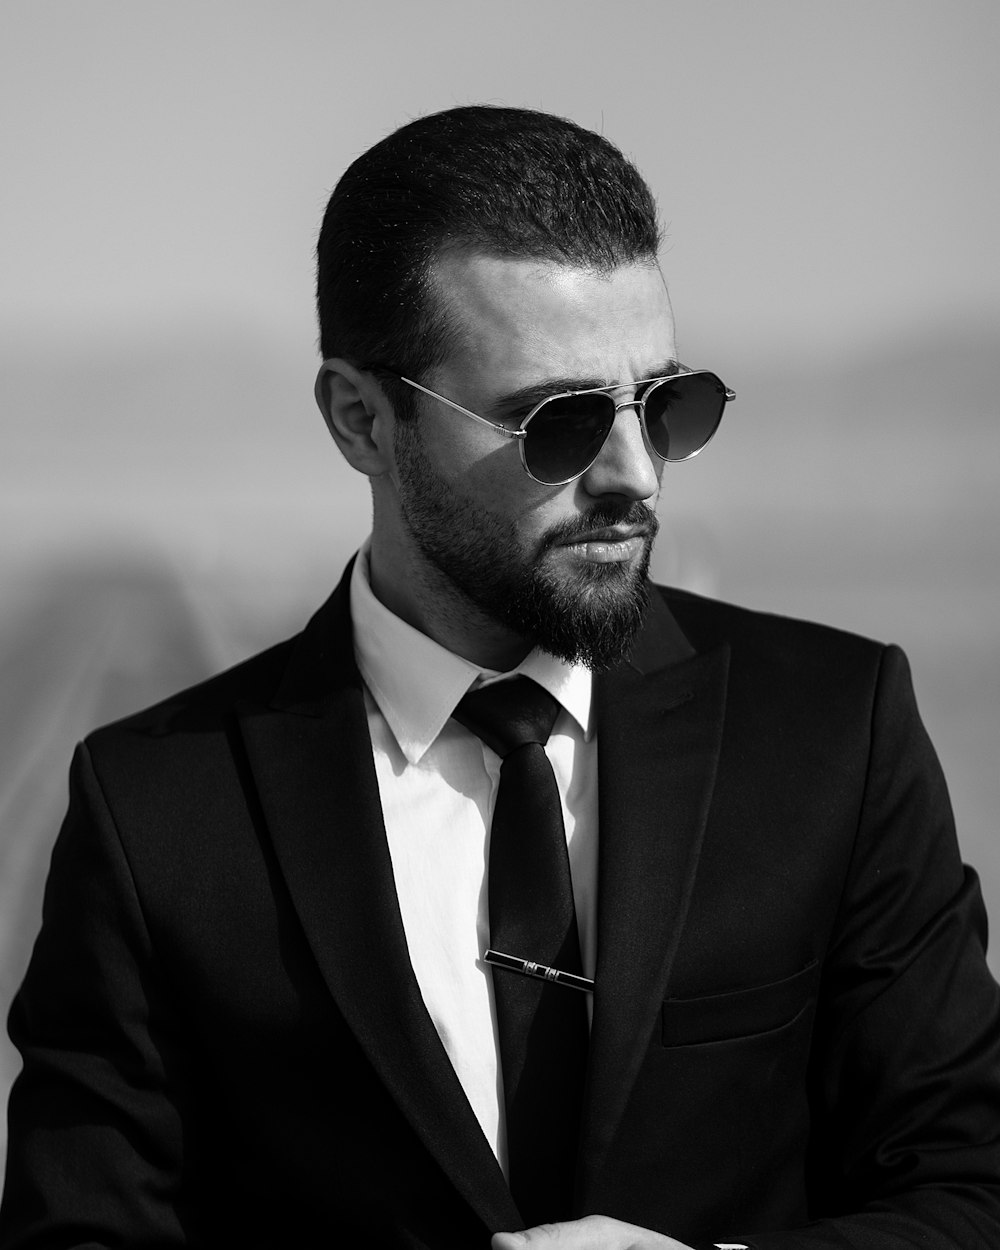 a man in a suit and tie wearing sunglasses